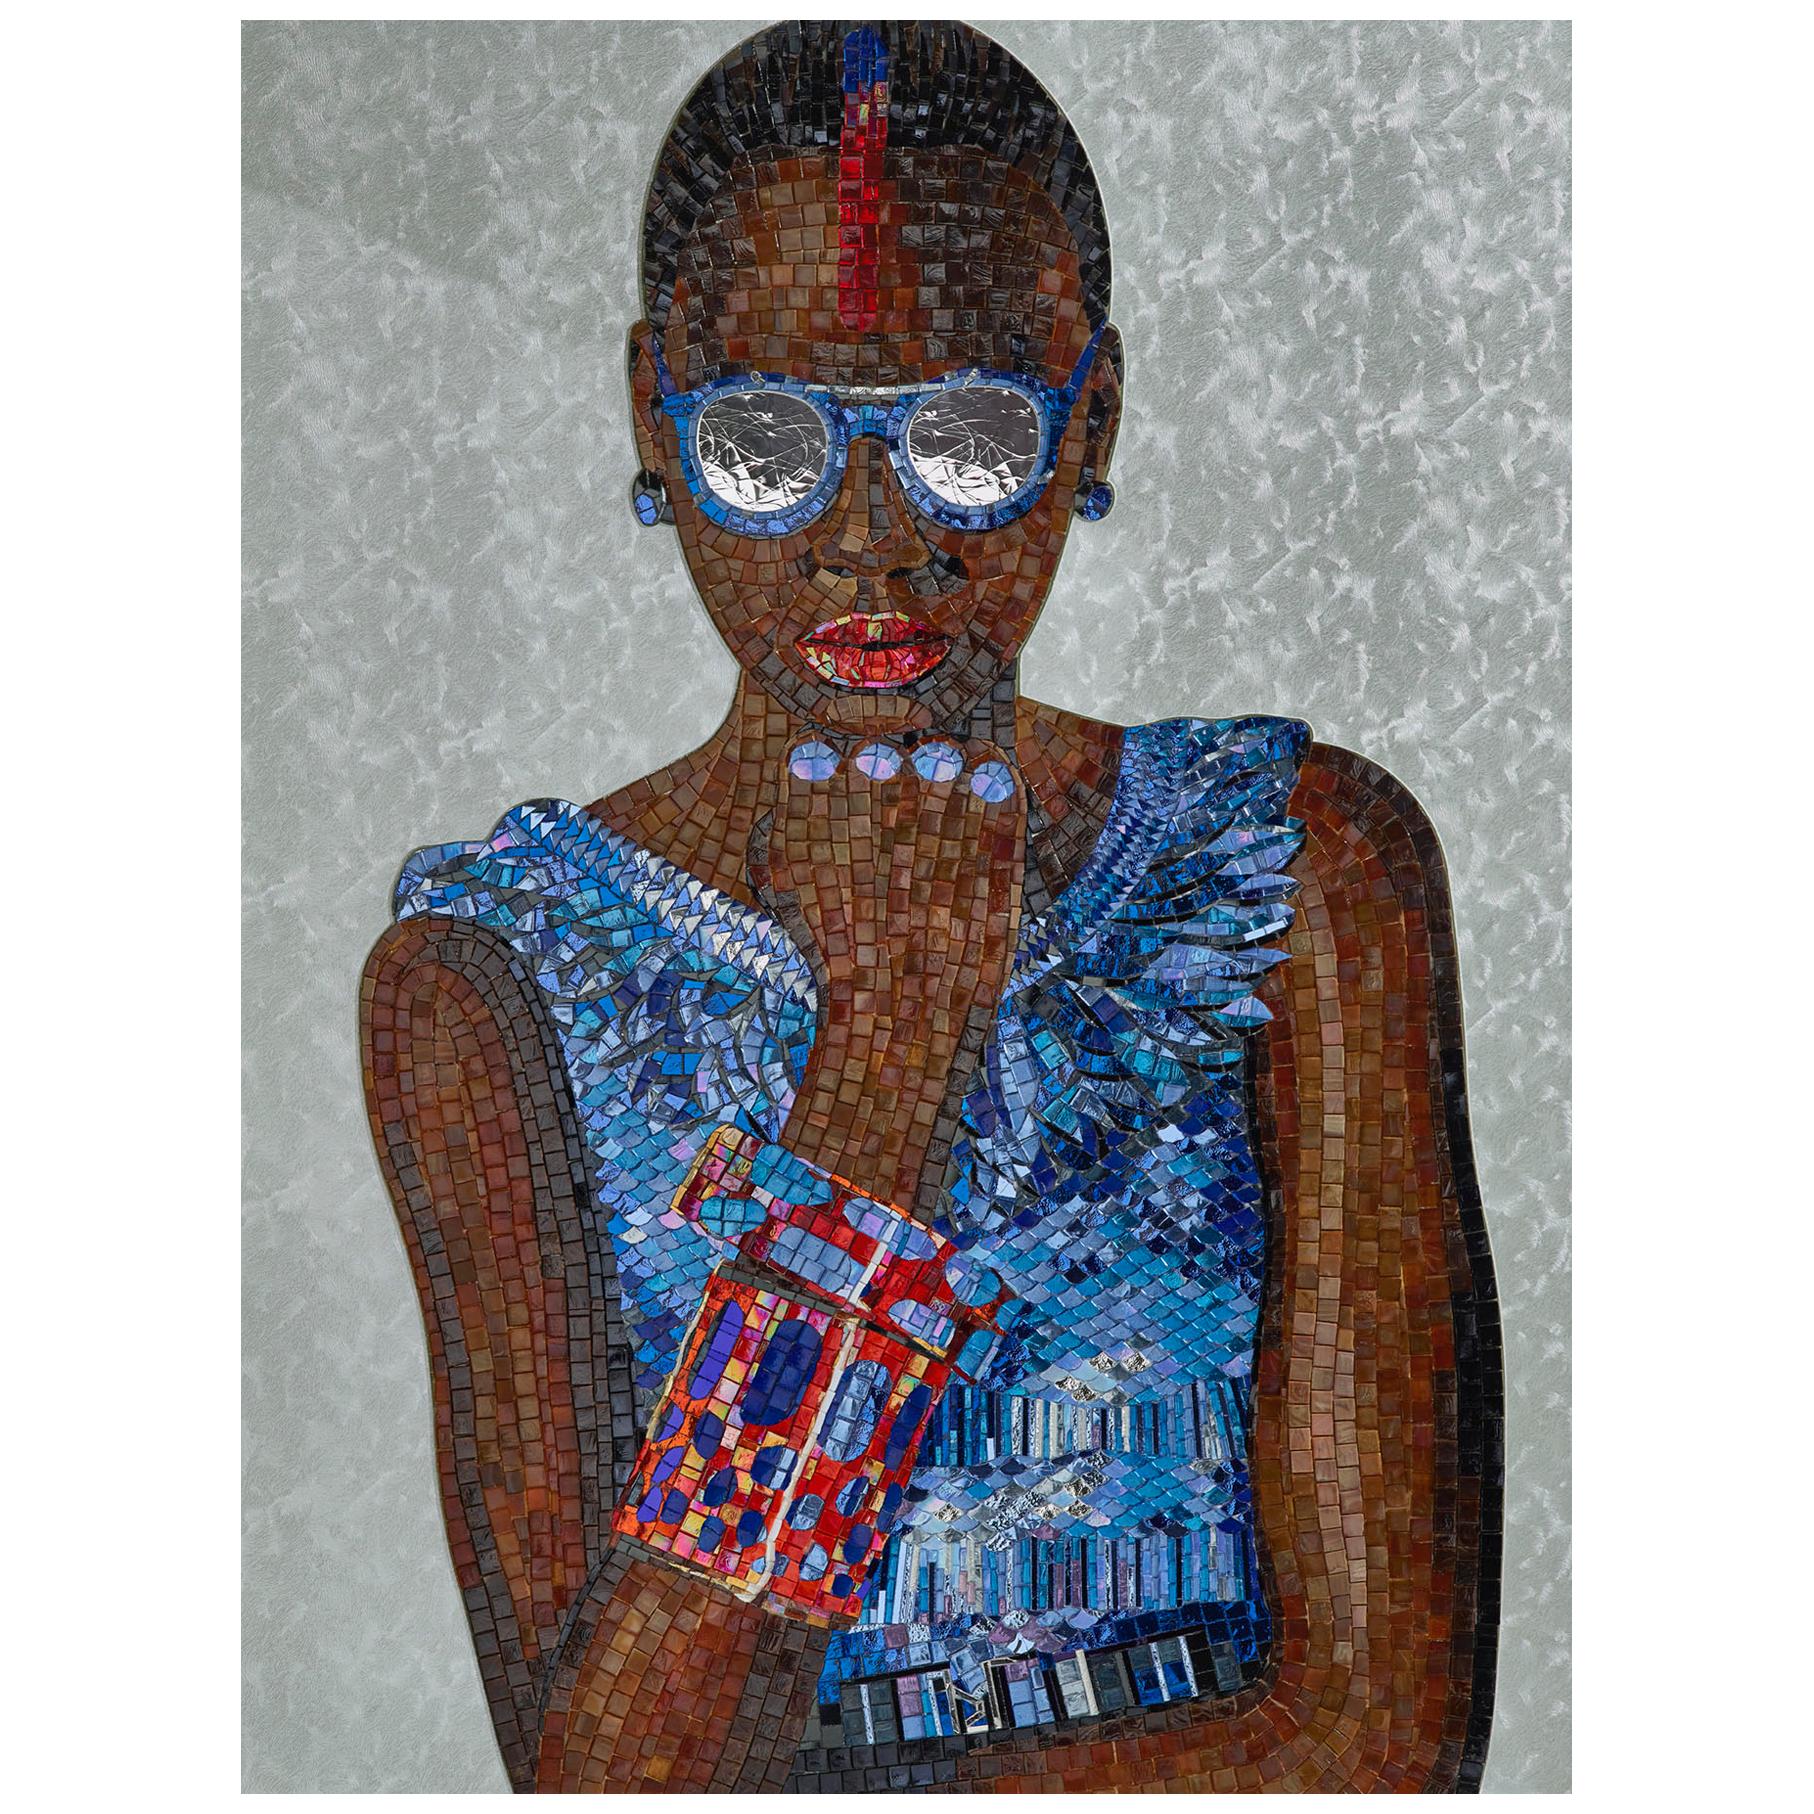 Beautiful Portrait Artistic Mosaic on White Metal Support Holes on Back to Hang For Sale